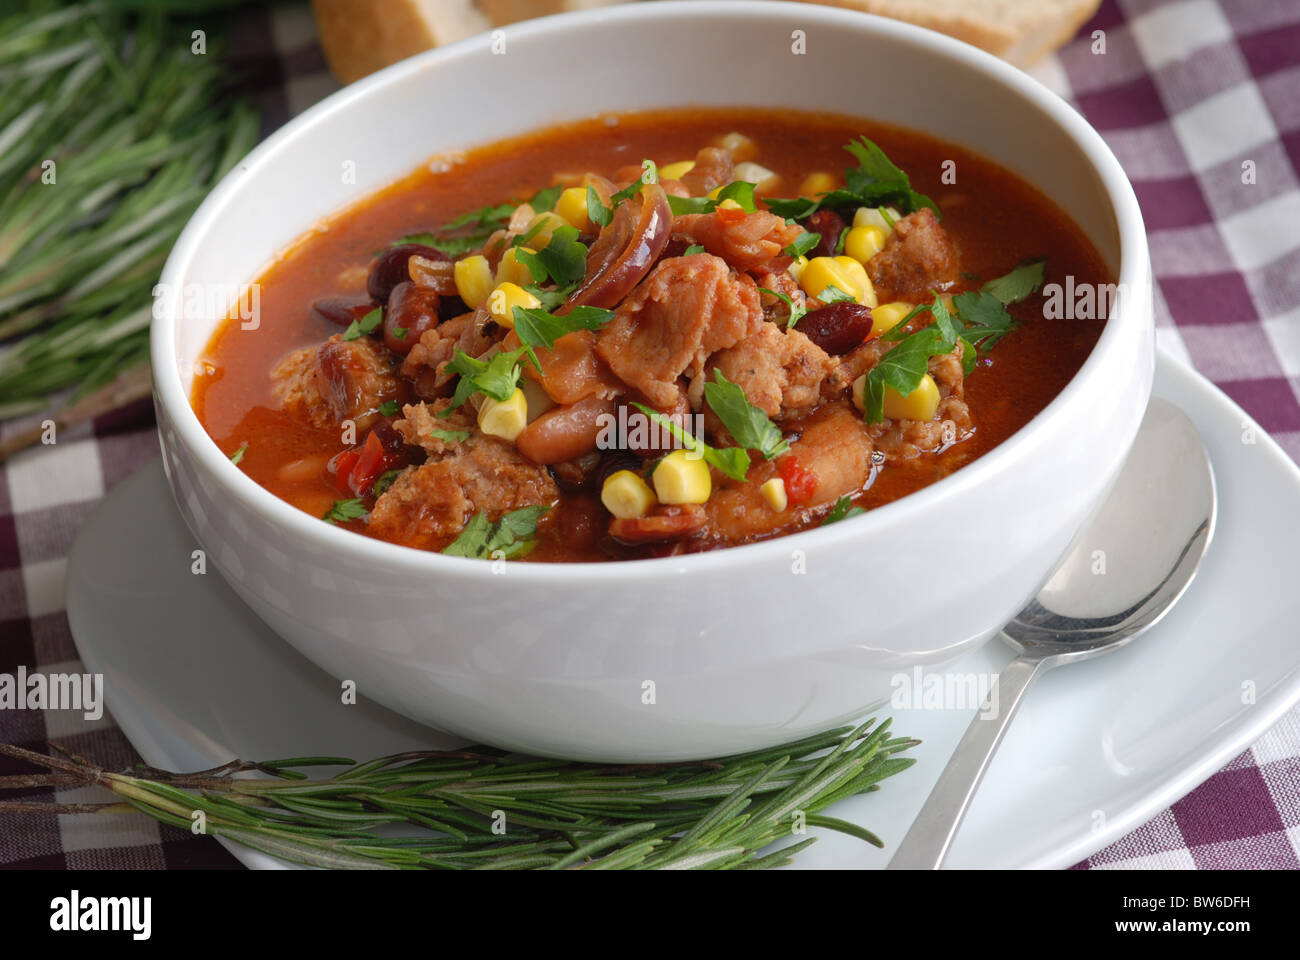 Spicy Italian bean and sausage casserole Stock Photo